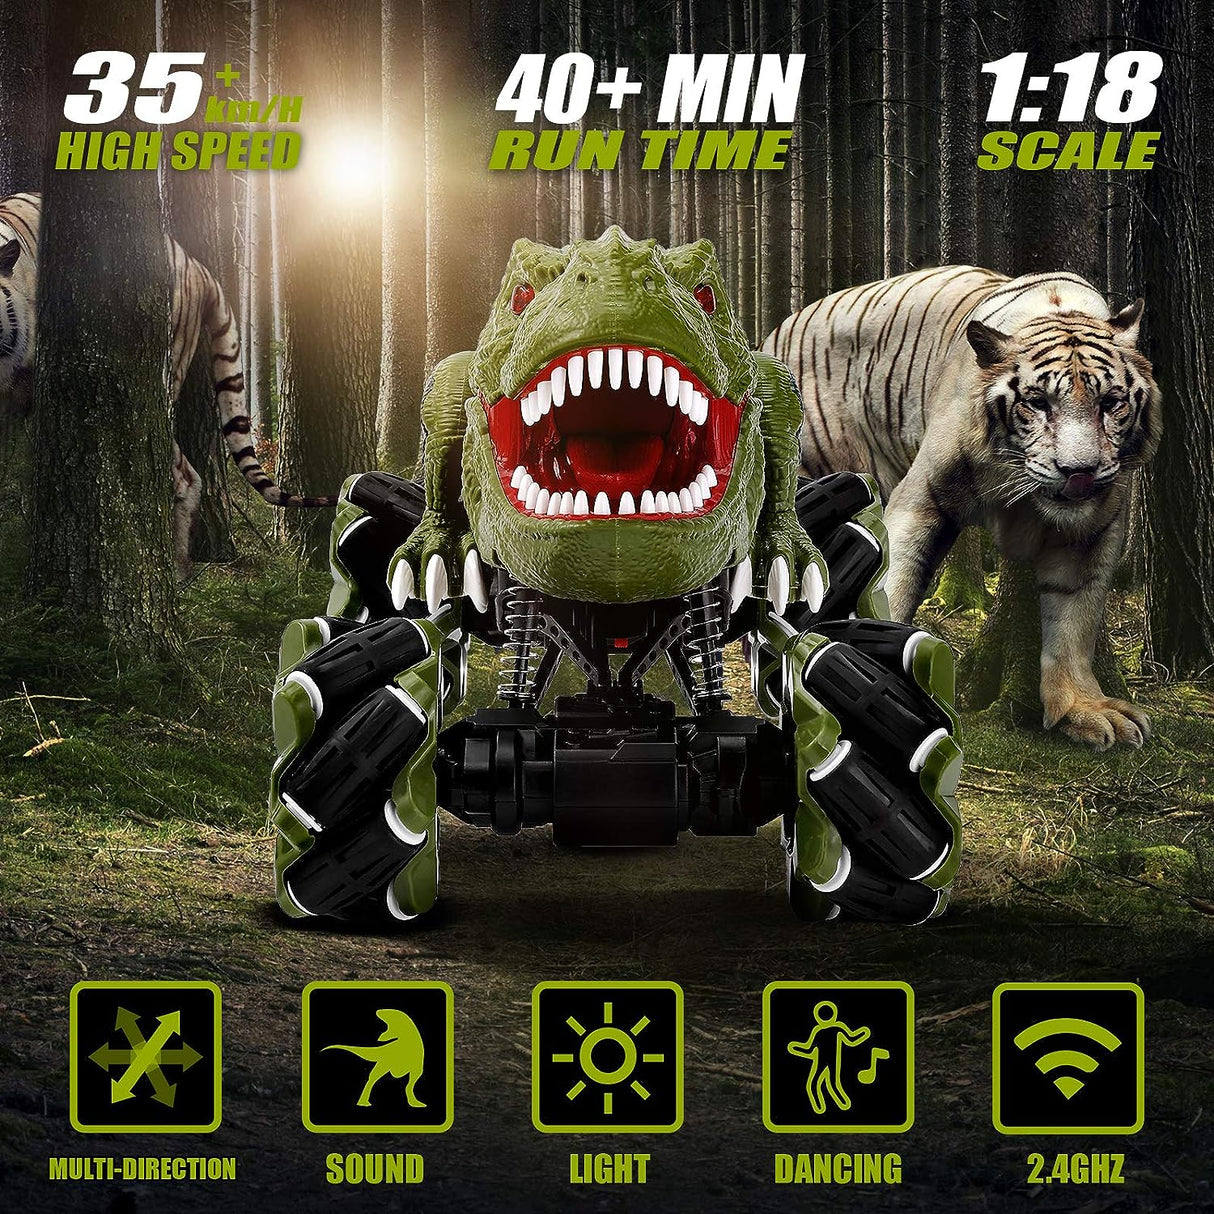 BAKAM Remote Control Monster Truck for Boys 8-12, 4WD Dinosaur Car Toy with Light & Sound, 2.4Ghz Hobby RC Car 4x4 Off Road Truck Gift for Kids